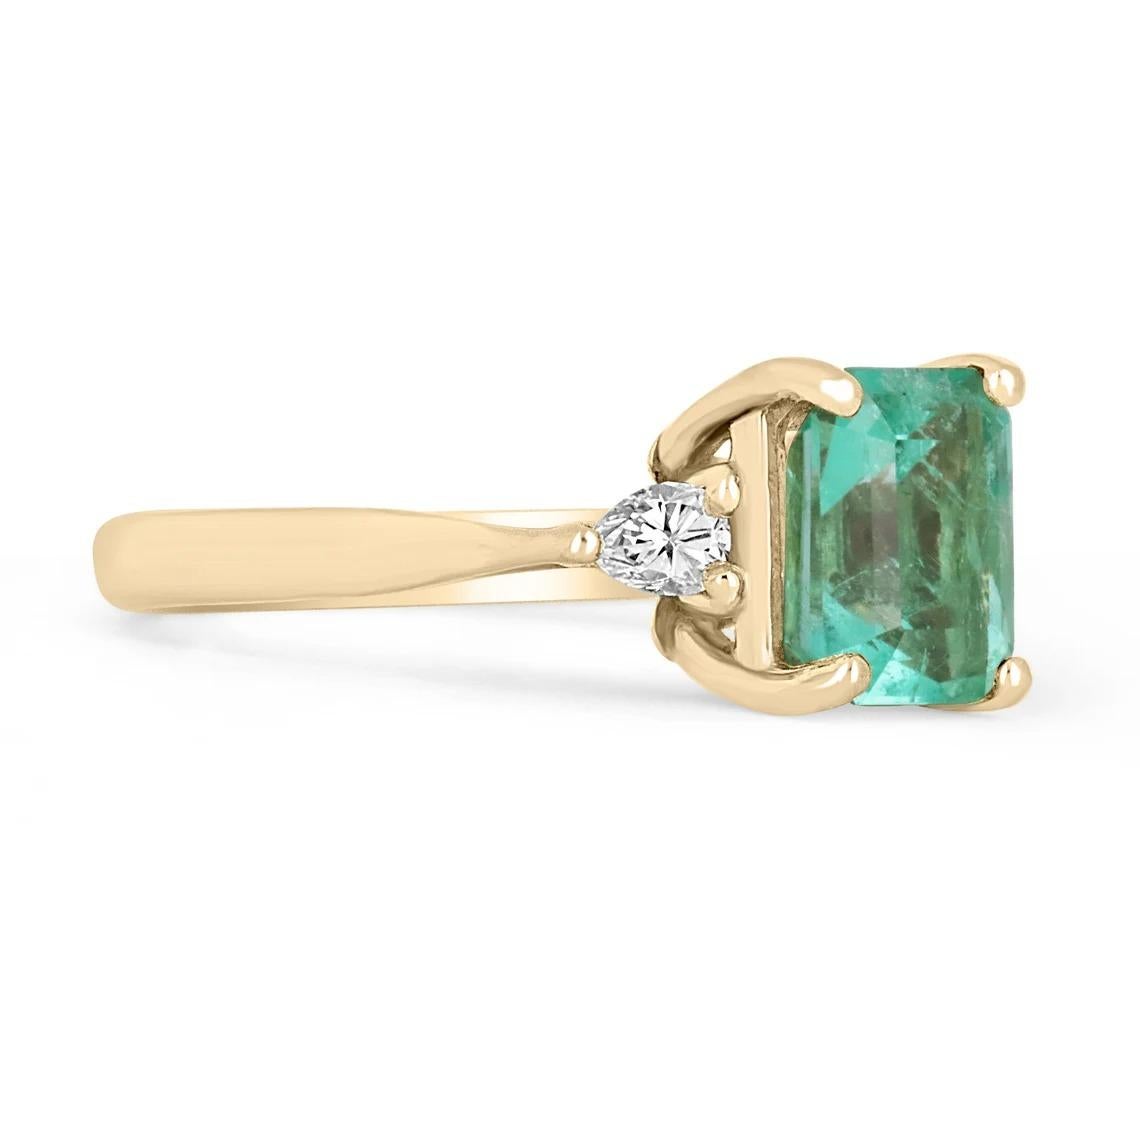 A classic Colombian emerald and diamond engagement, statement, or right-hand ring. Dexterously crafted in gleaming 14K gold this ring features a natural Colombian emerald-emerald cut from the famous Muzo mines. Set in a secure prong setting, this